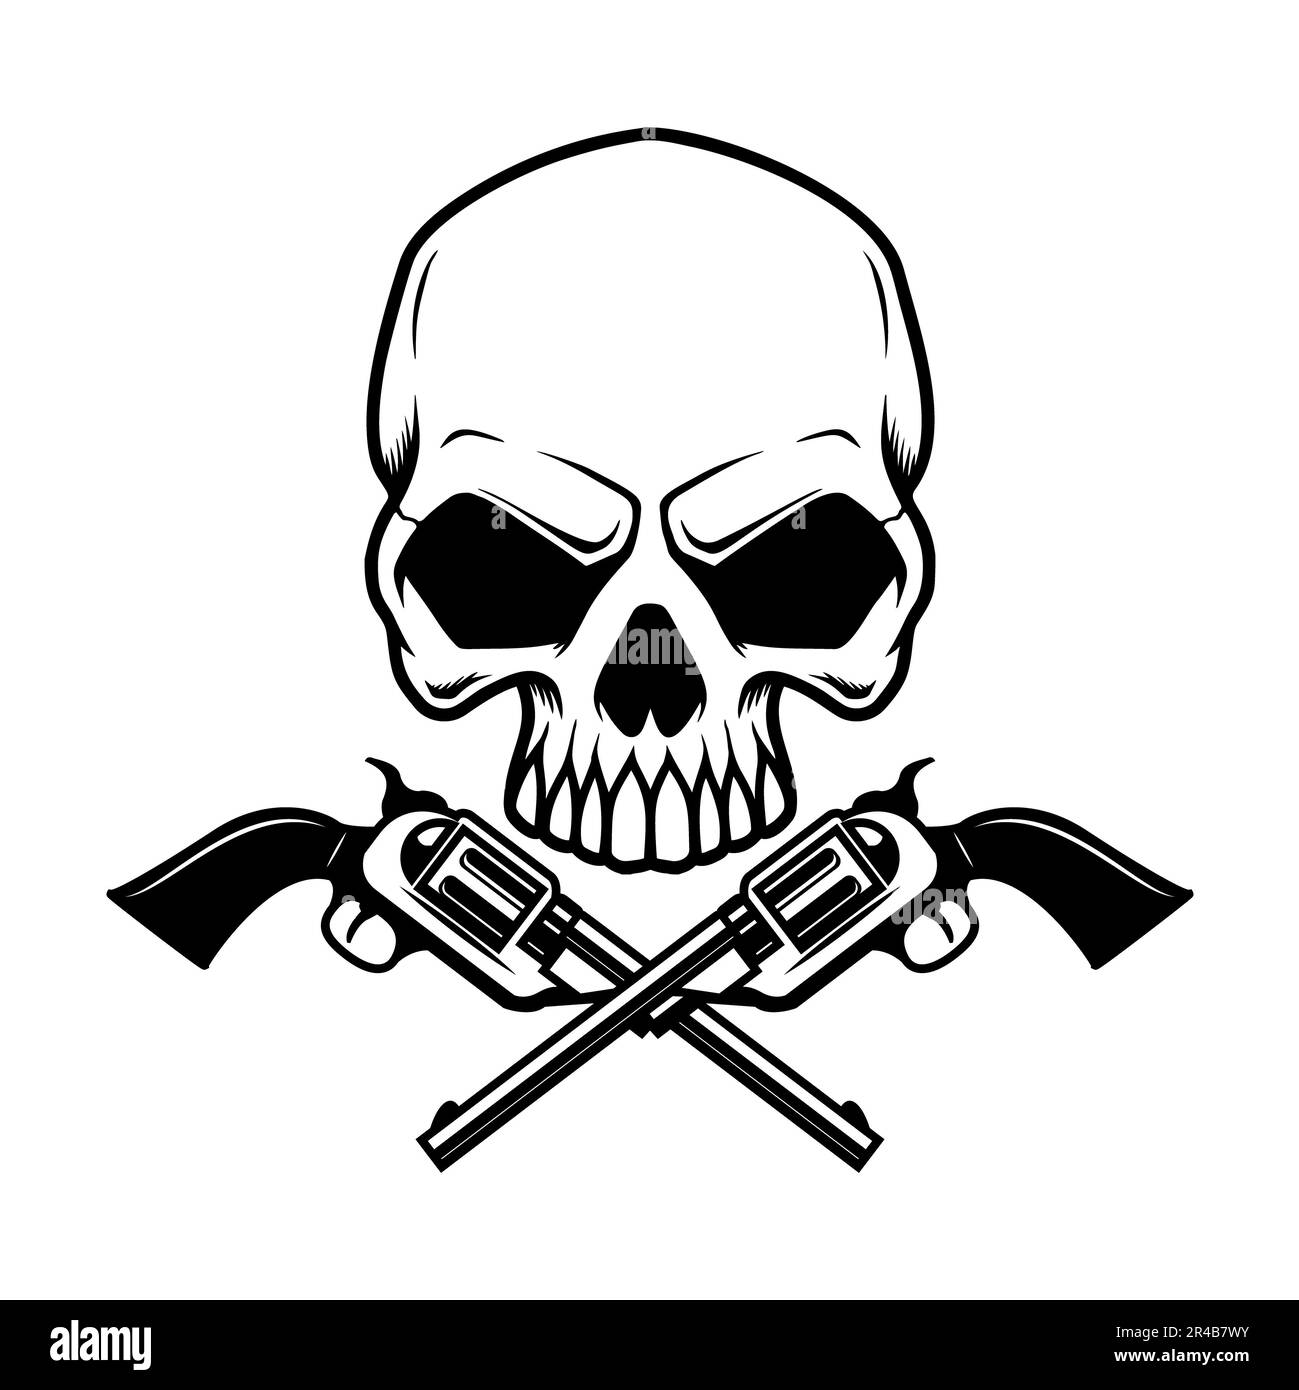 Illustration of the cowboy skull with crossed revolvers. Design element for logo, label, sign, emblem. Vector illustration, Illustration of the cowboy Stock Photo